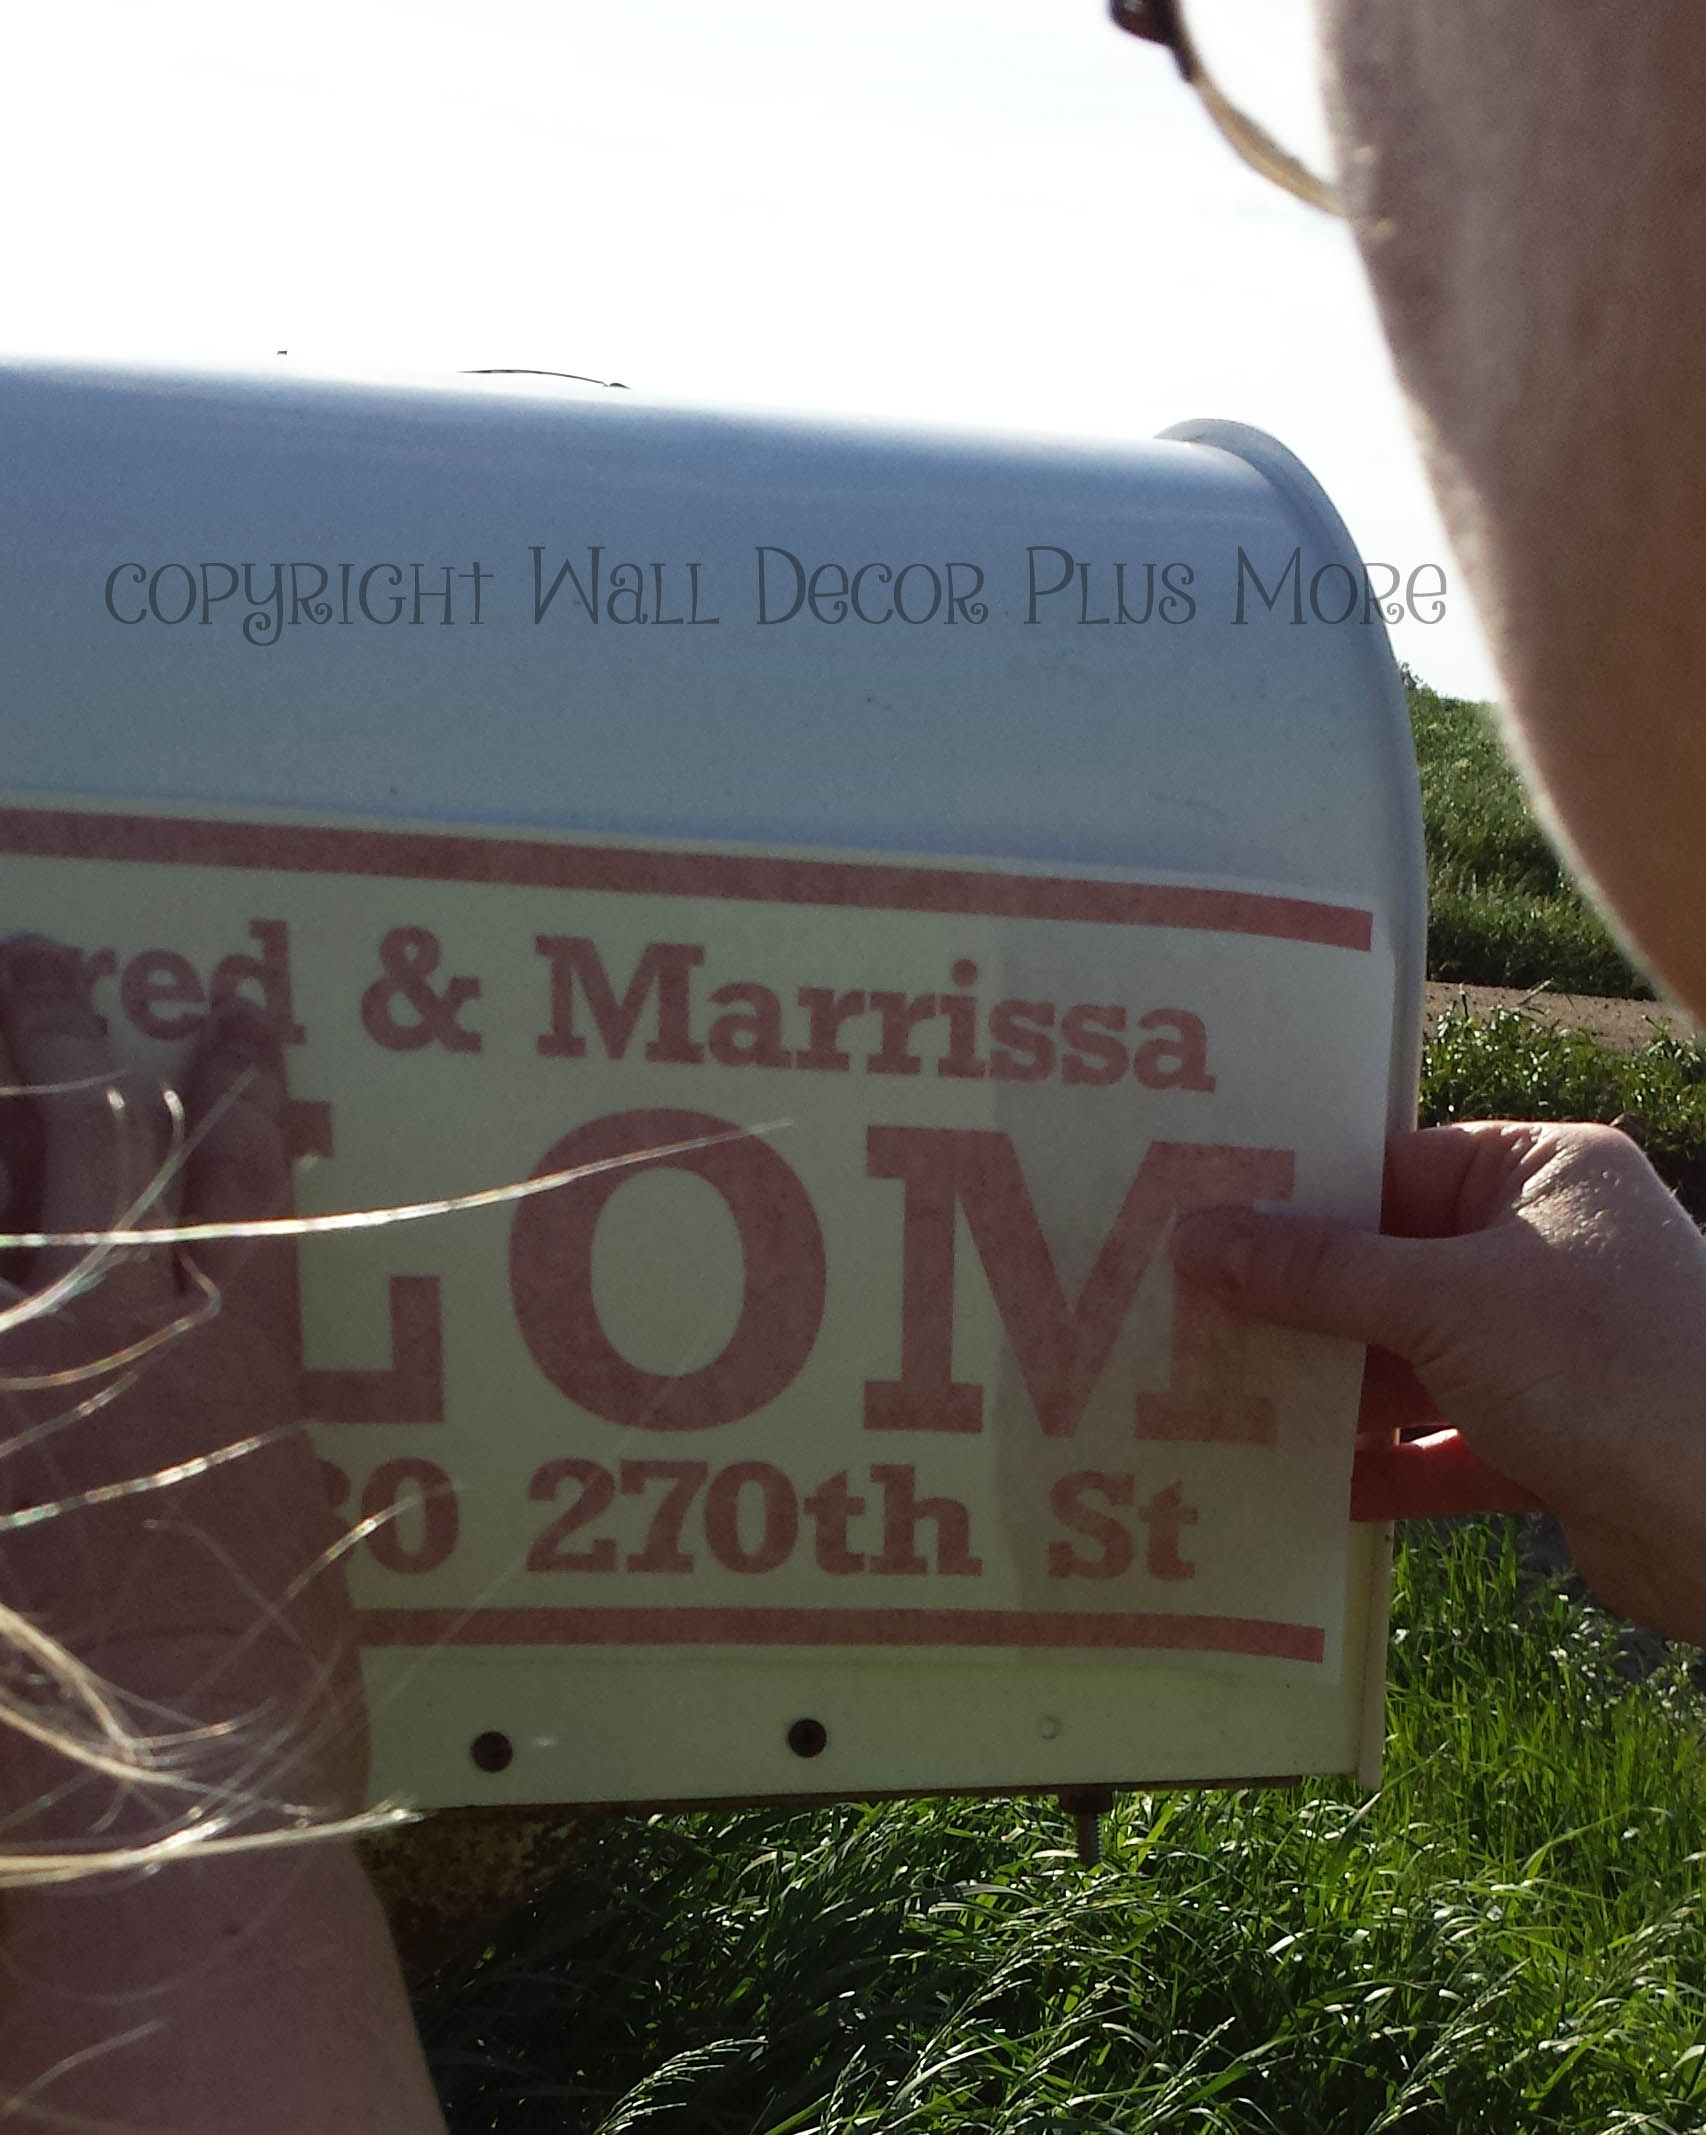 How to apply Vinyl Stickers using the Hinge Method with Mailbox Decals